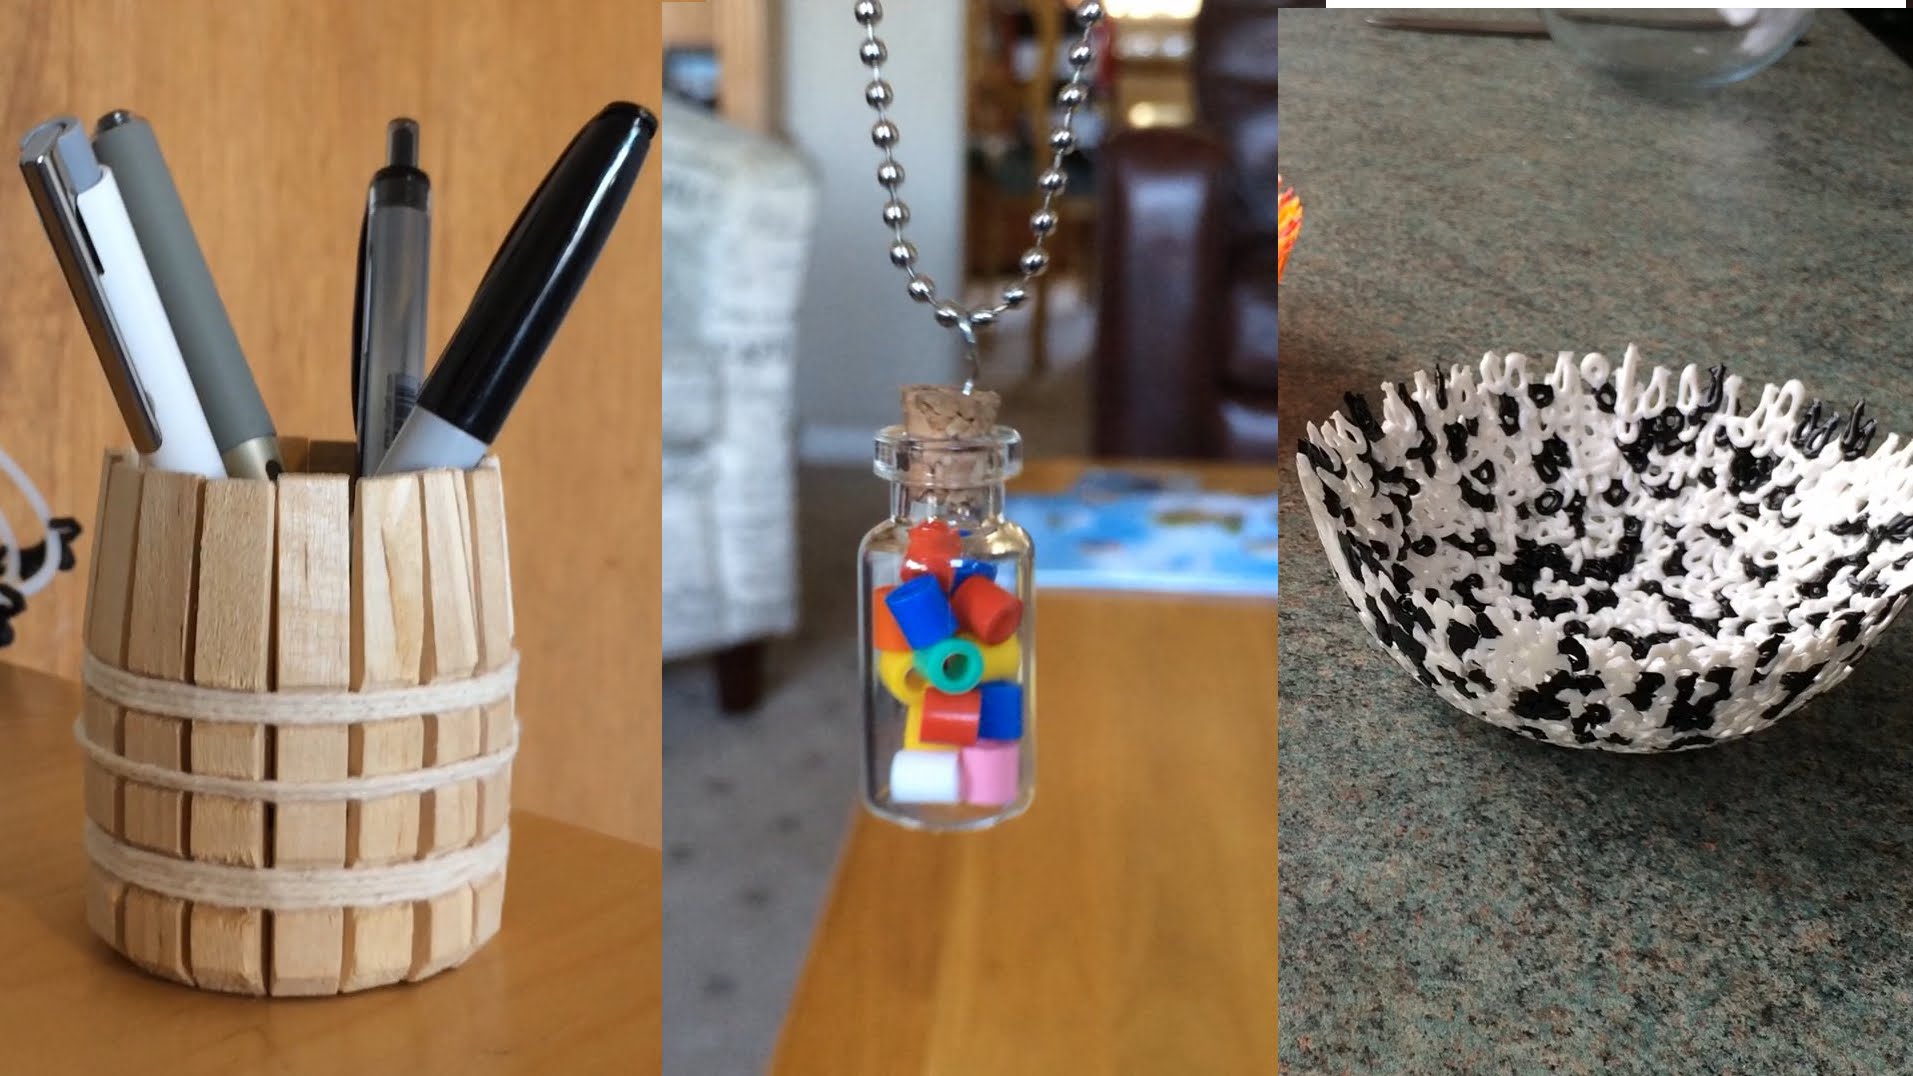 3 Simple Yet Awesome Do-It-Yourself Projects (Video)